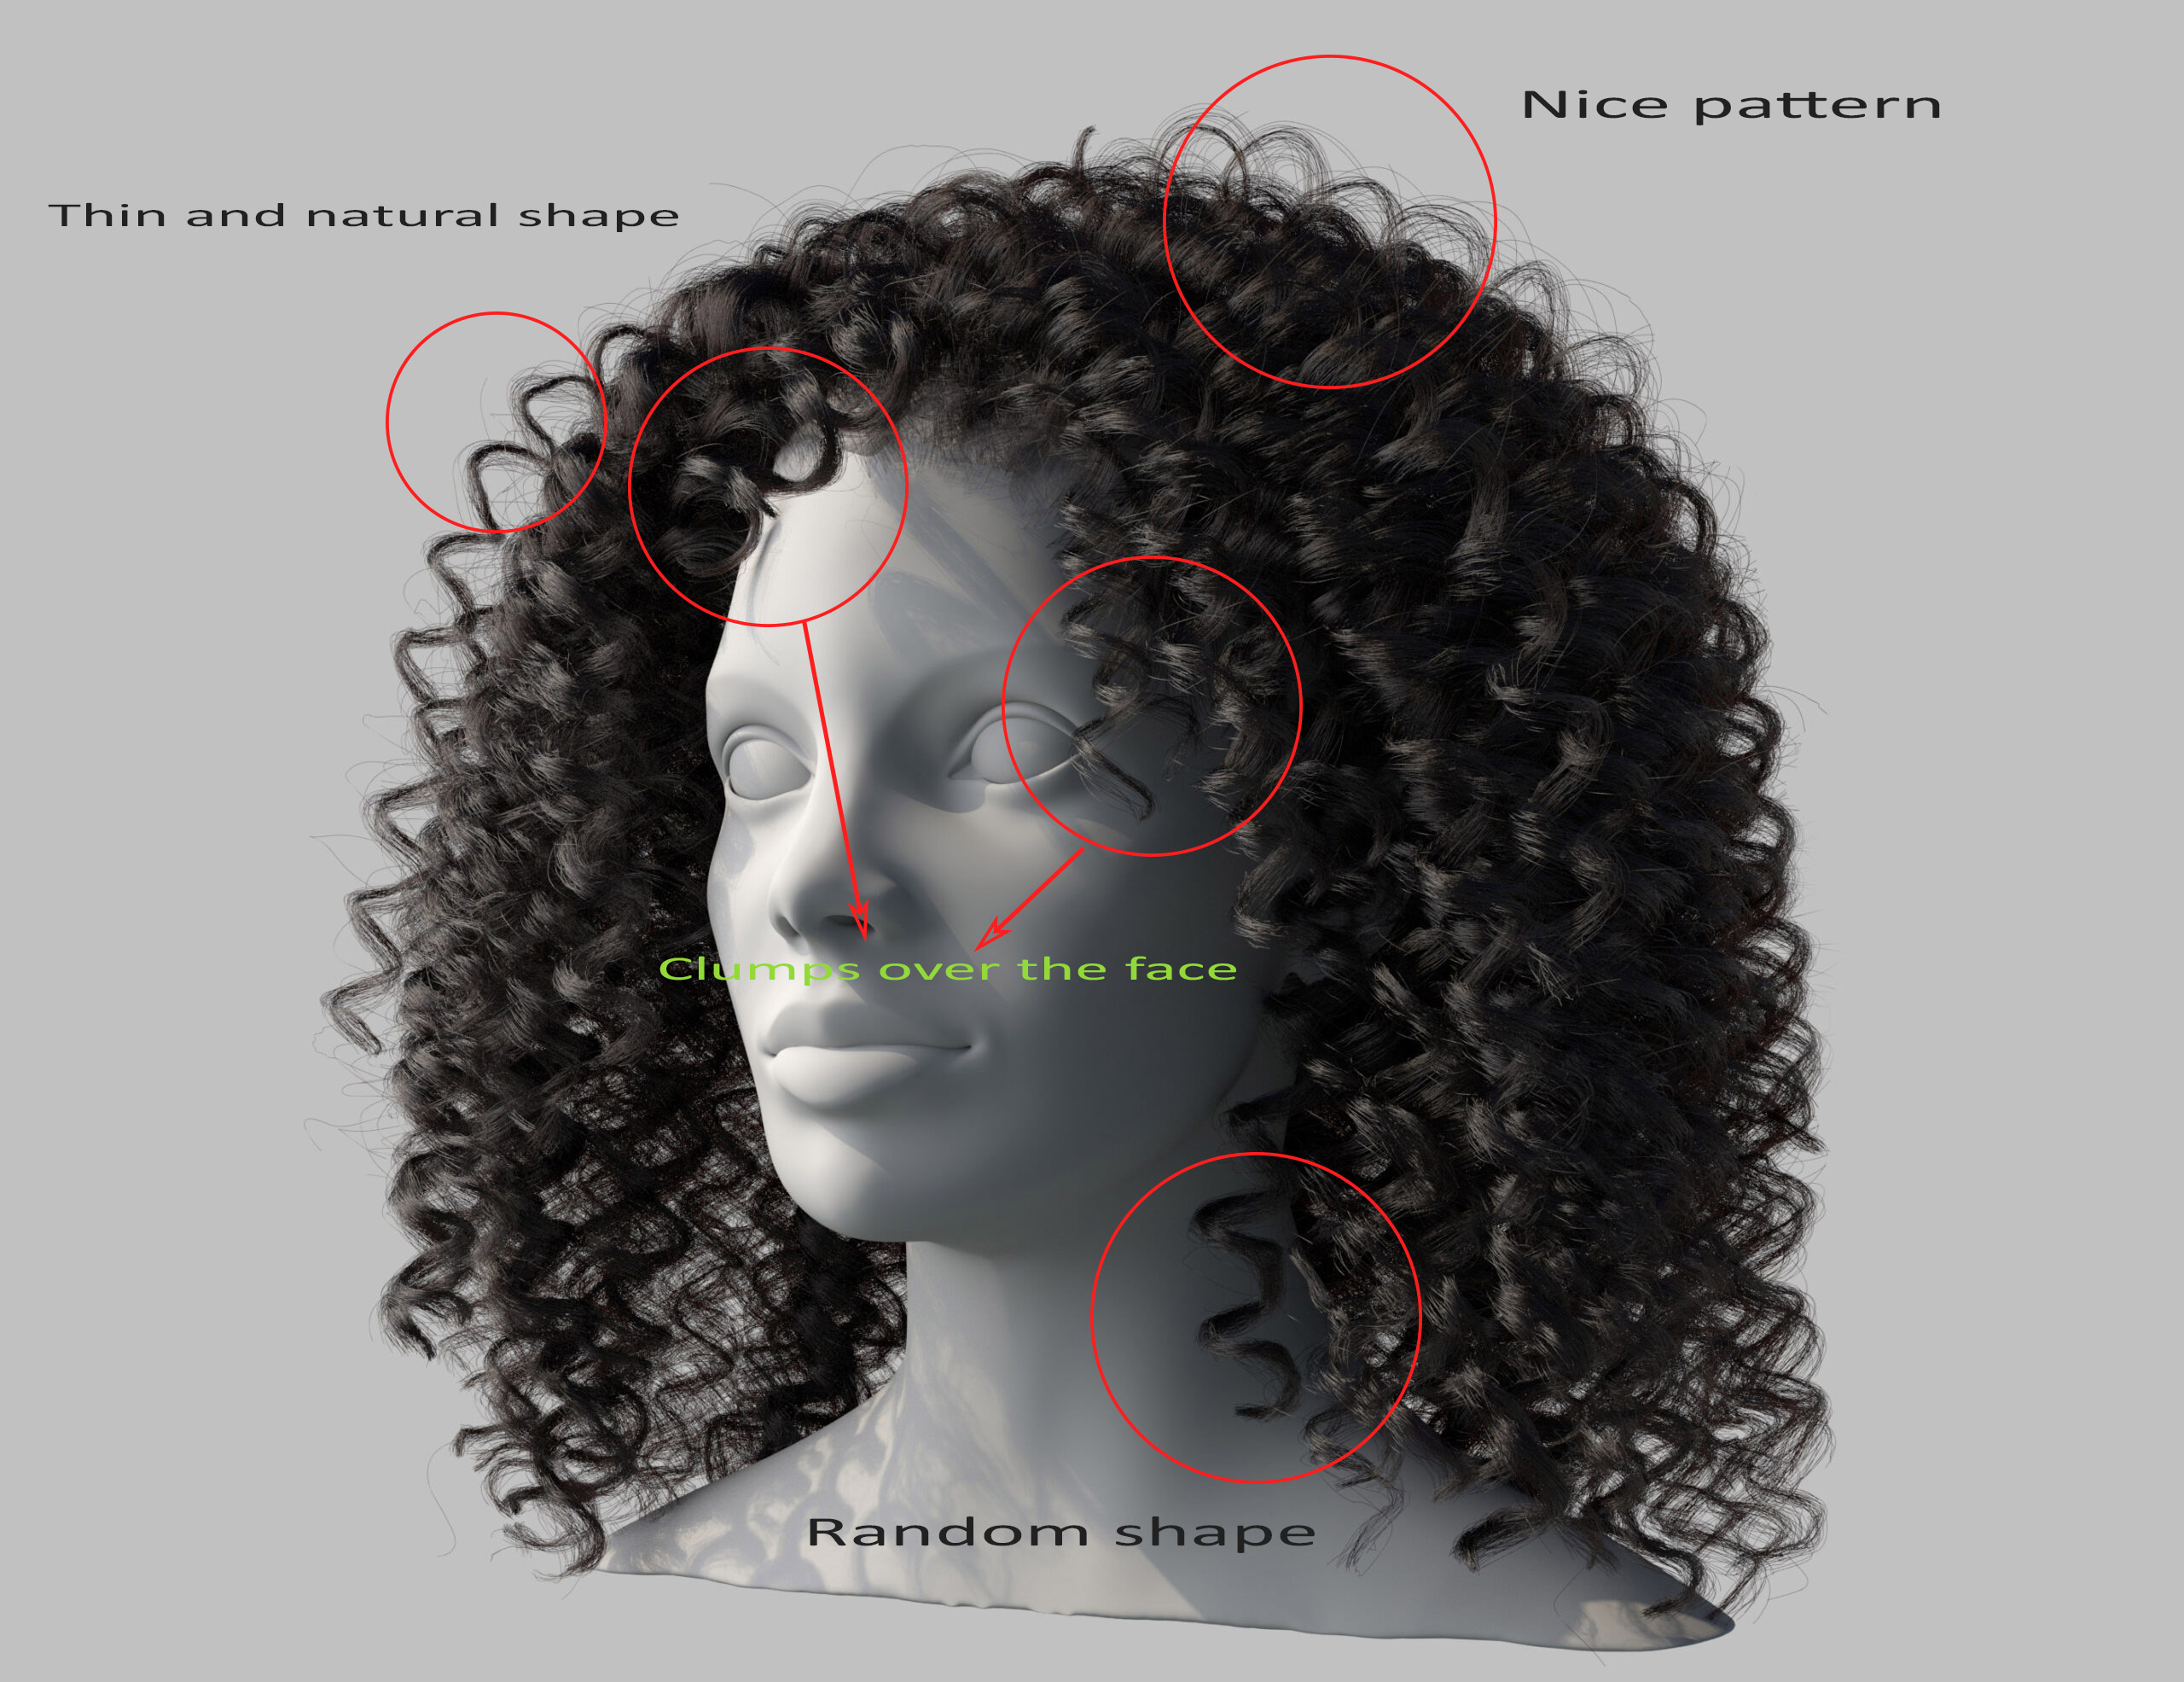 Features of the realistic curly/textured hair.